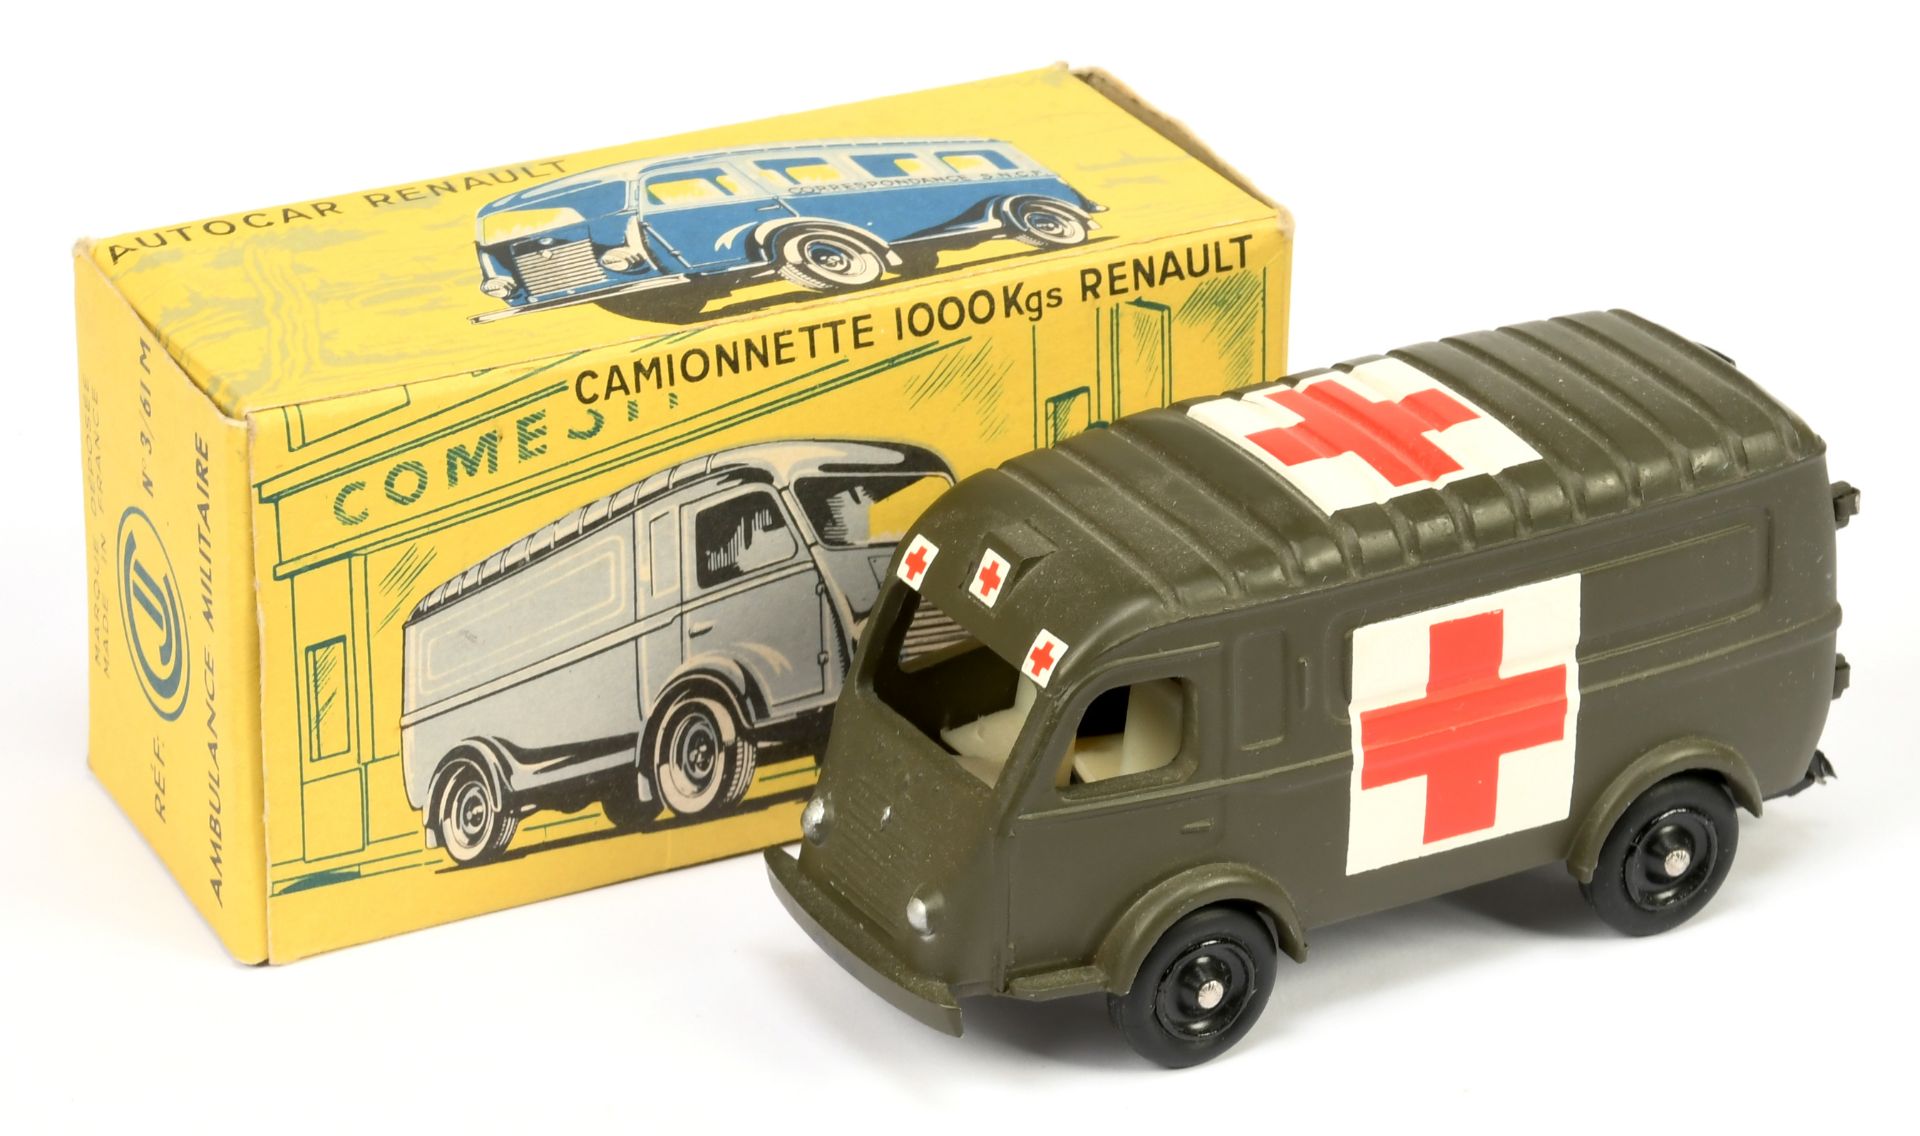 CIJ 3/61 Renault "Ambulance" - drab green, with red and white cross on roof